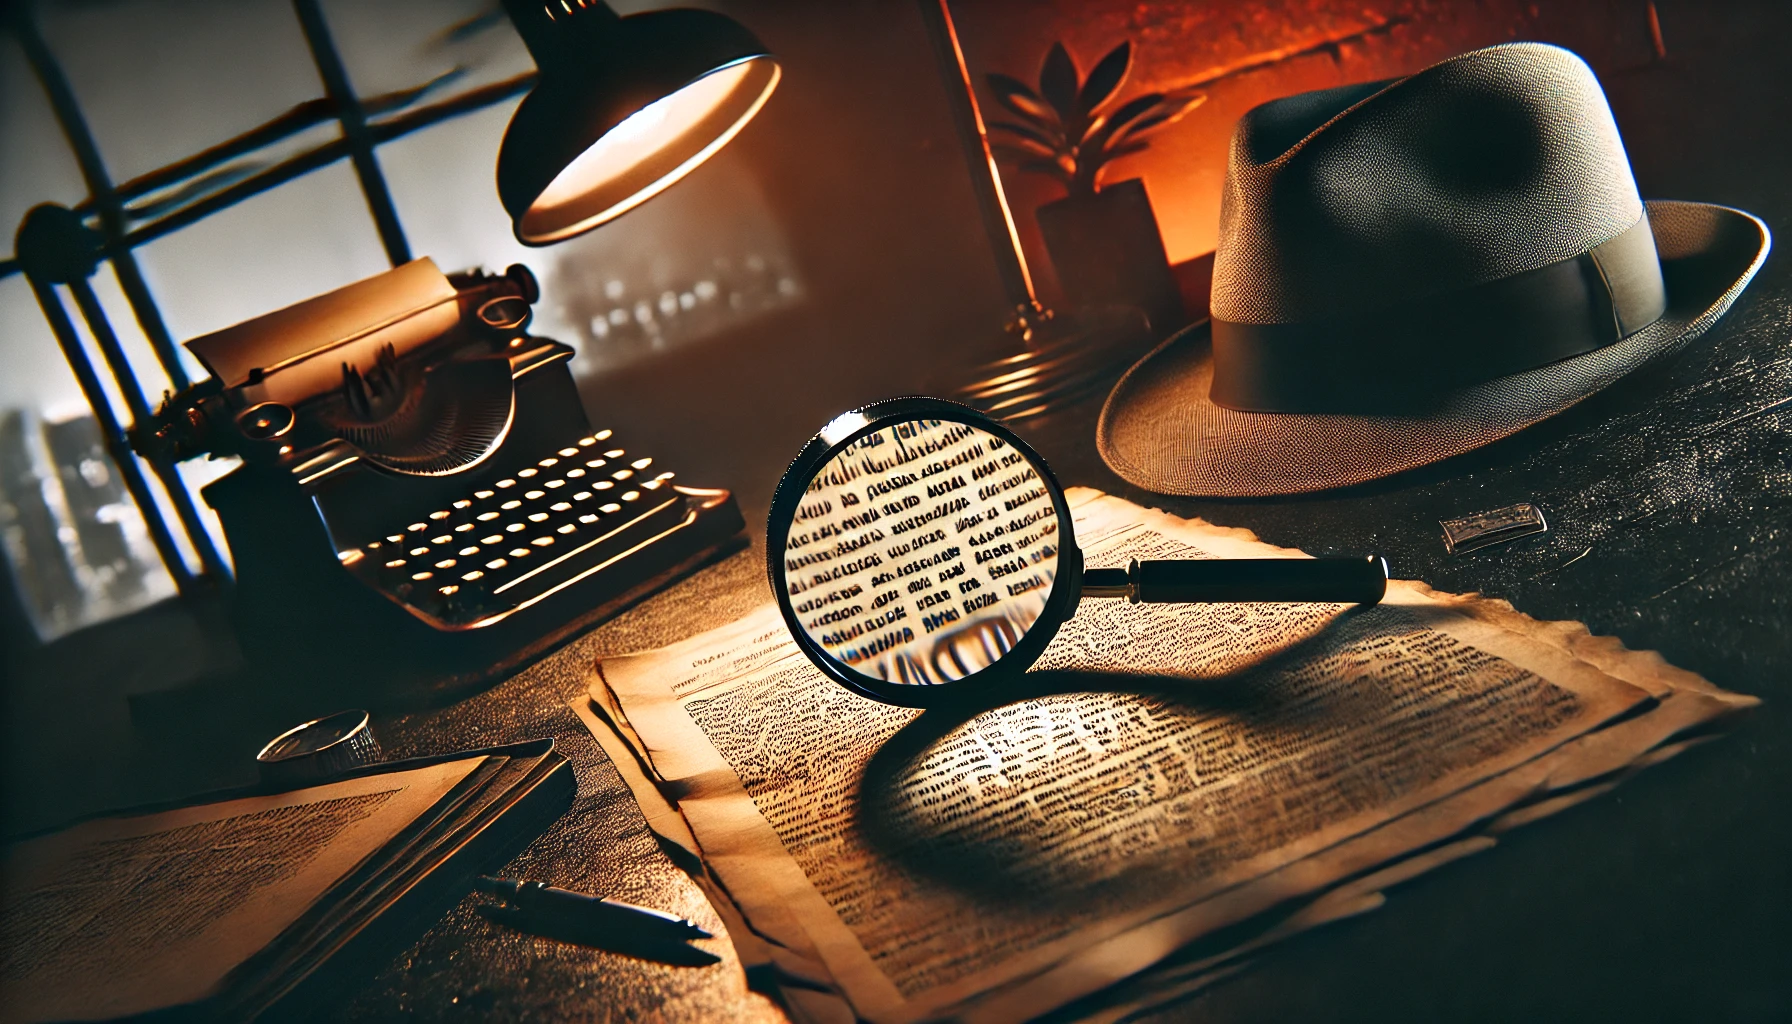 A film noir-style scene with a magnifying glass in the foreground, focusing on a document with mysterious symbols and text. The scene is set on a desk with dramatic shadows and muted colors. The background includes a fedora hat, a dimly lit lamp, and a hint of a cityscape through a window, creating an atmosphere of mystery and intrigue.